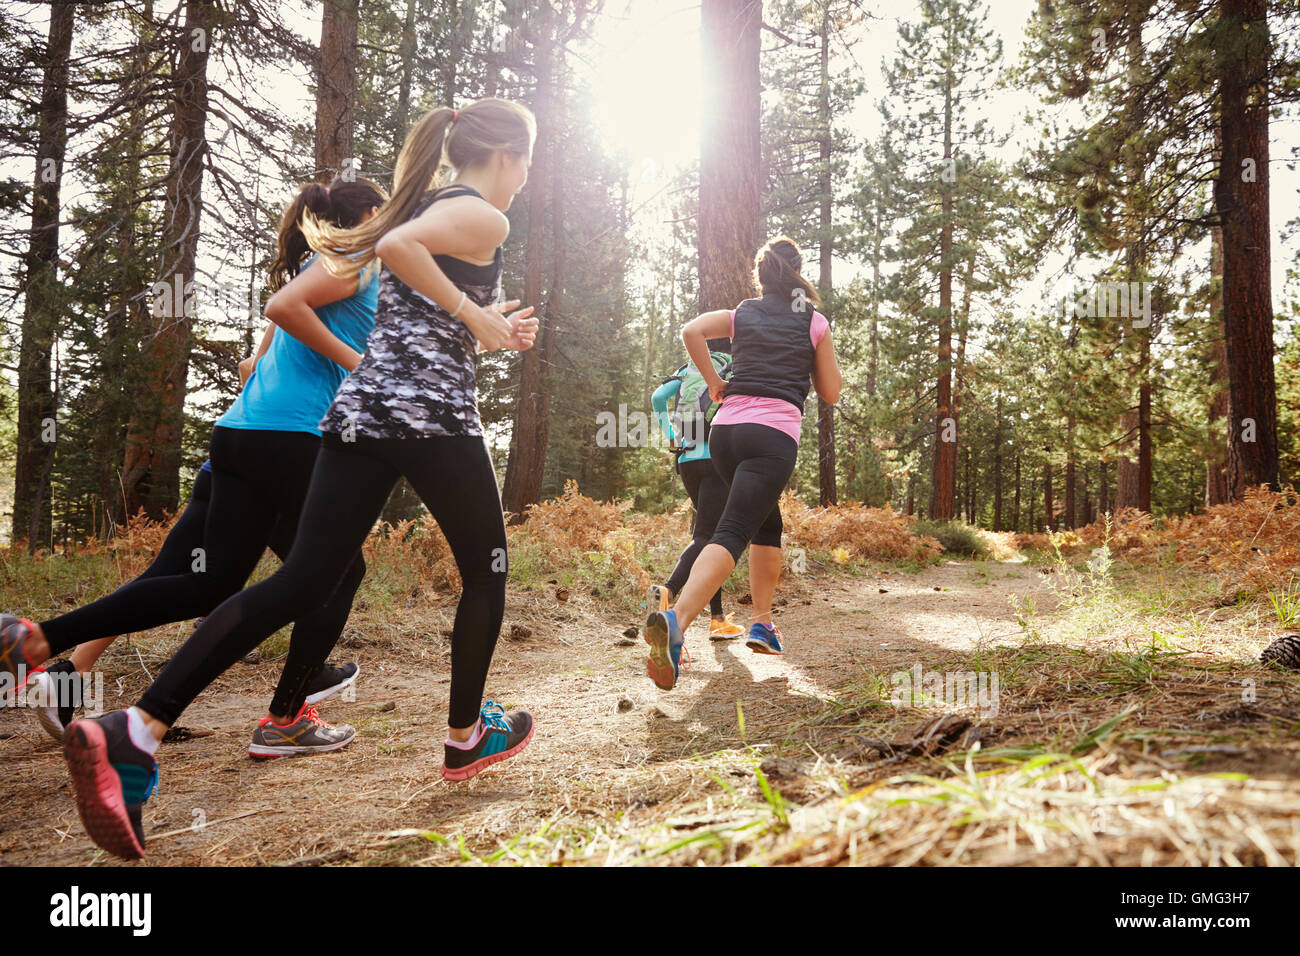 Group of young adult women running in a forest, back view Stock Photo